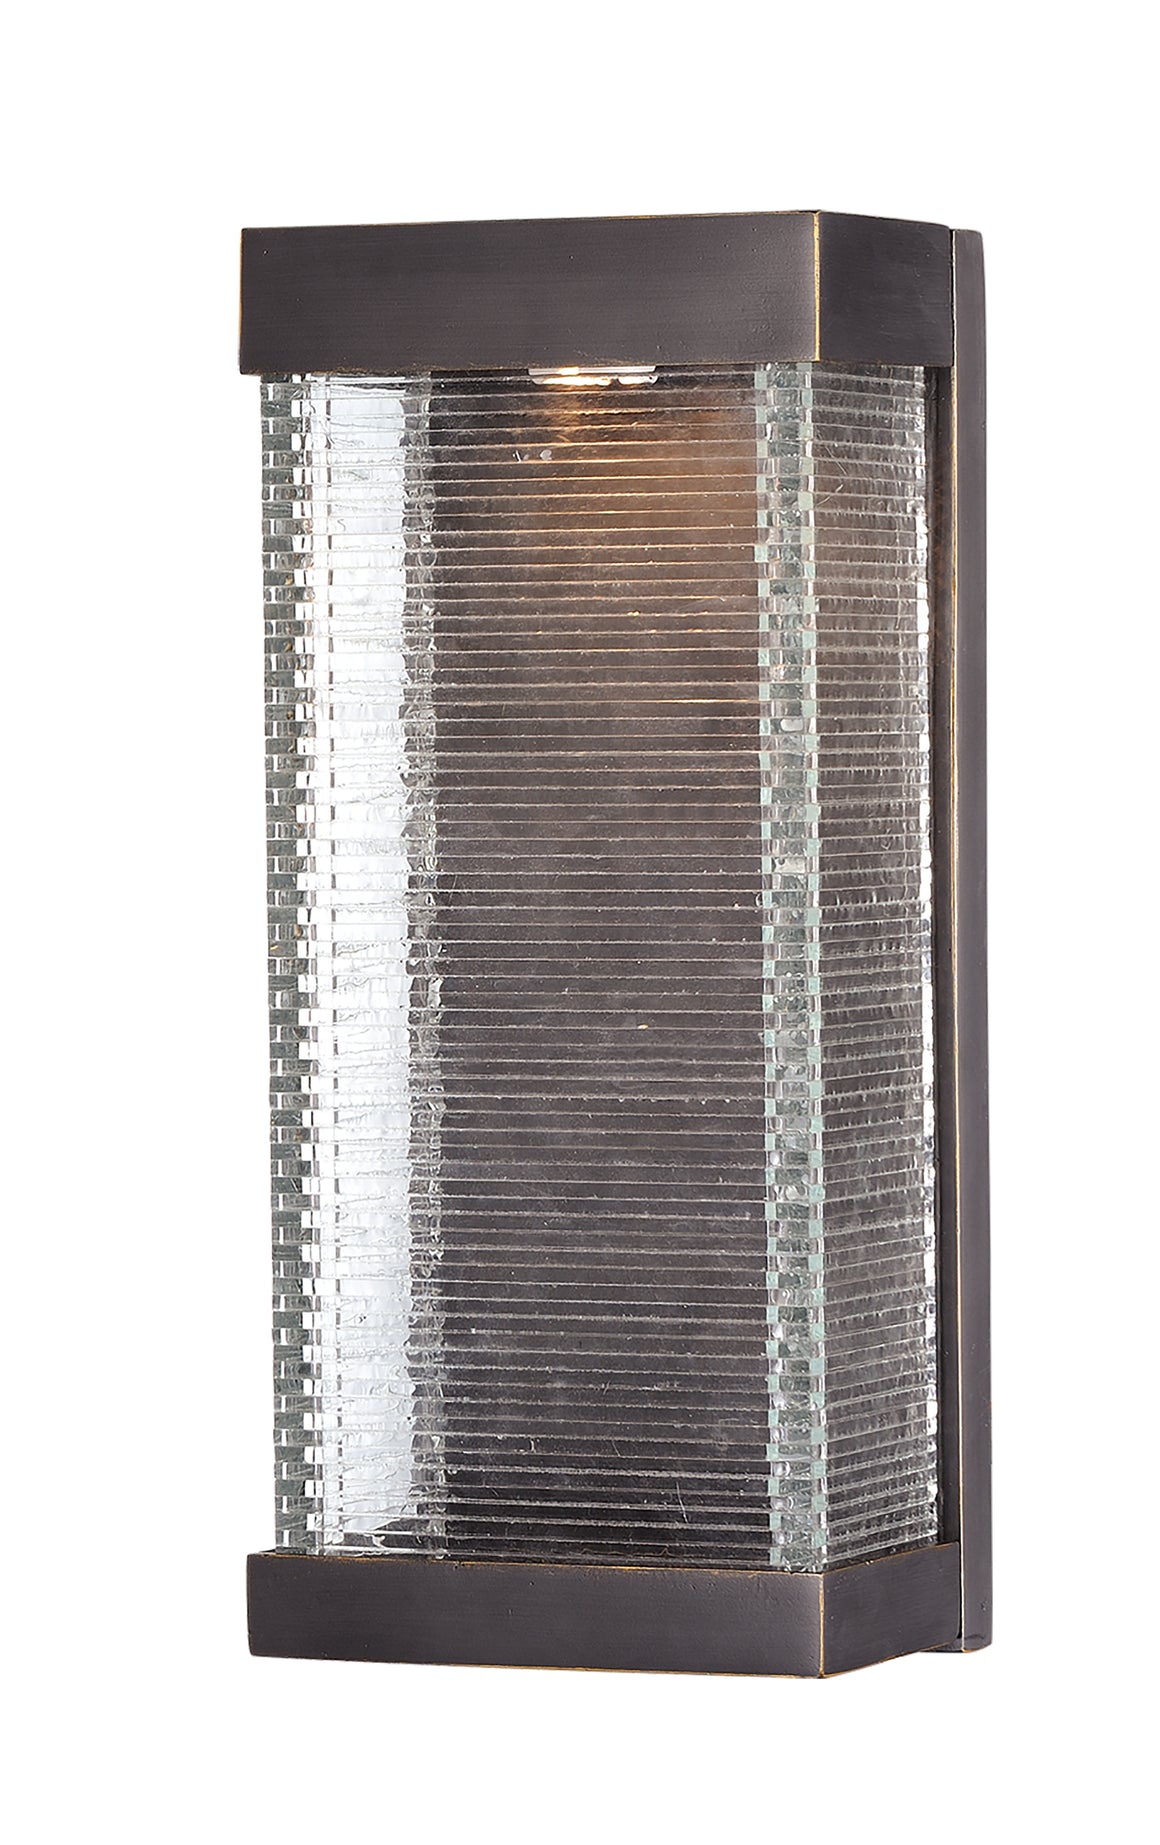 Stackhouse VX LED Outdoor Wall Sconce